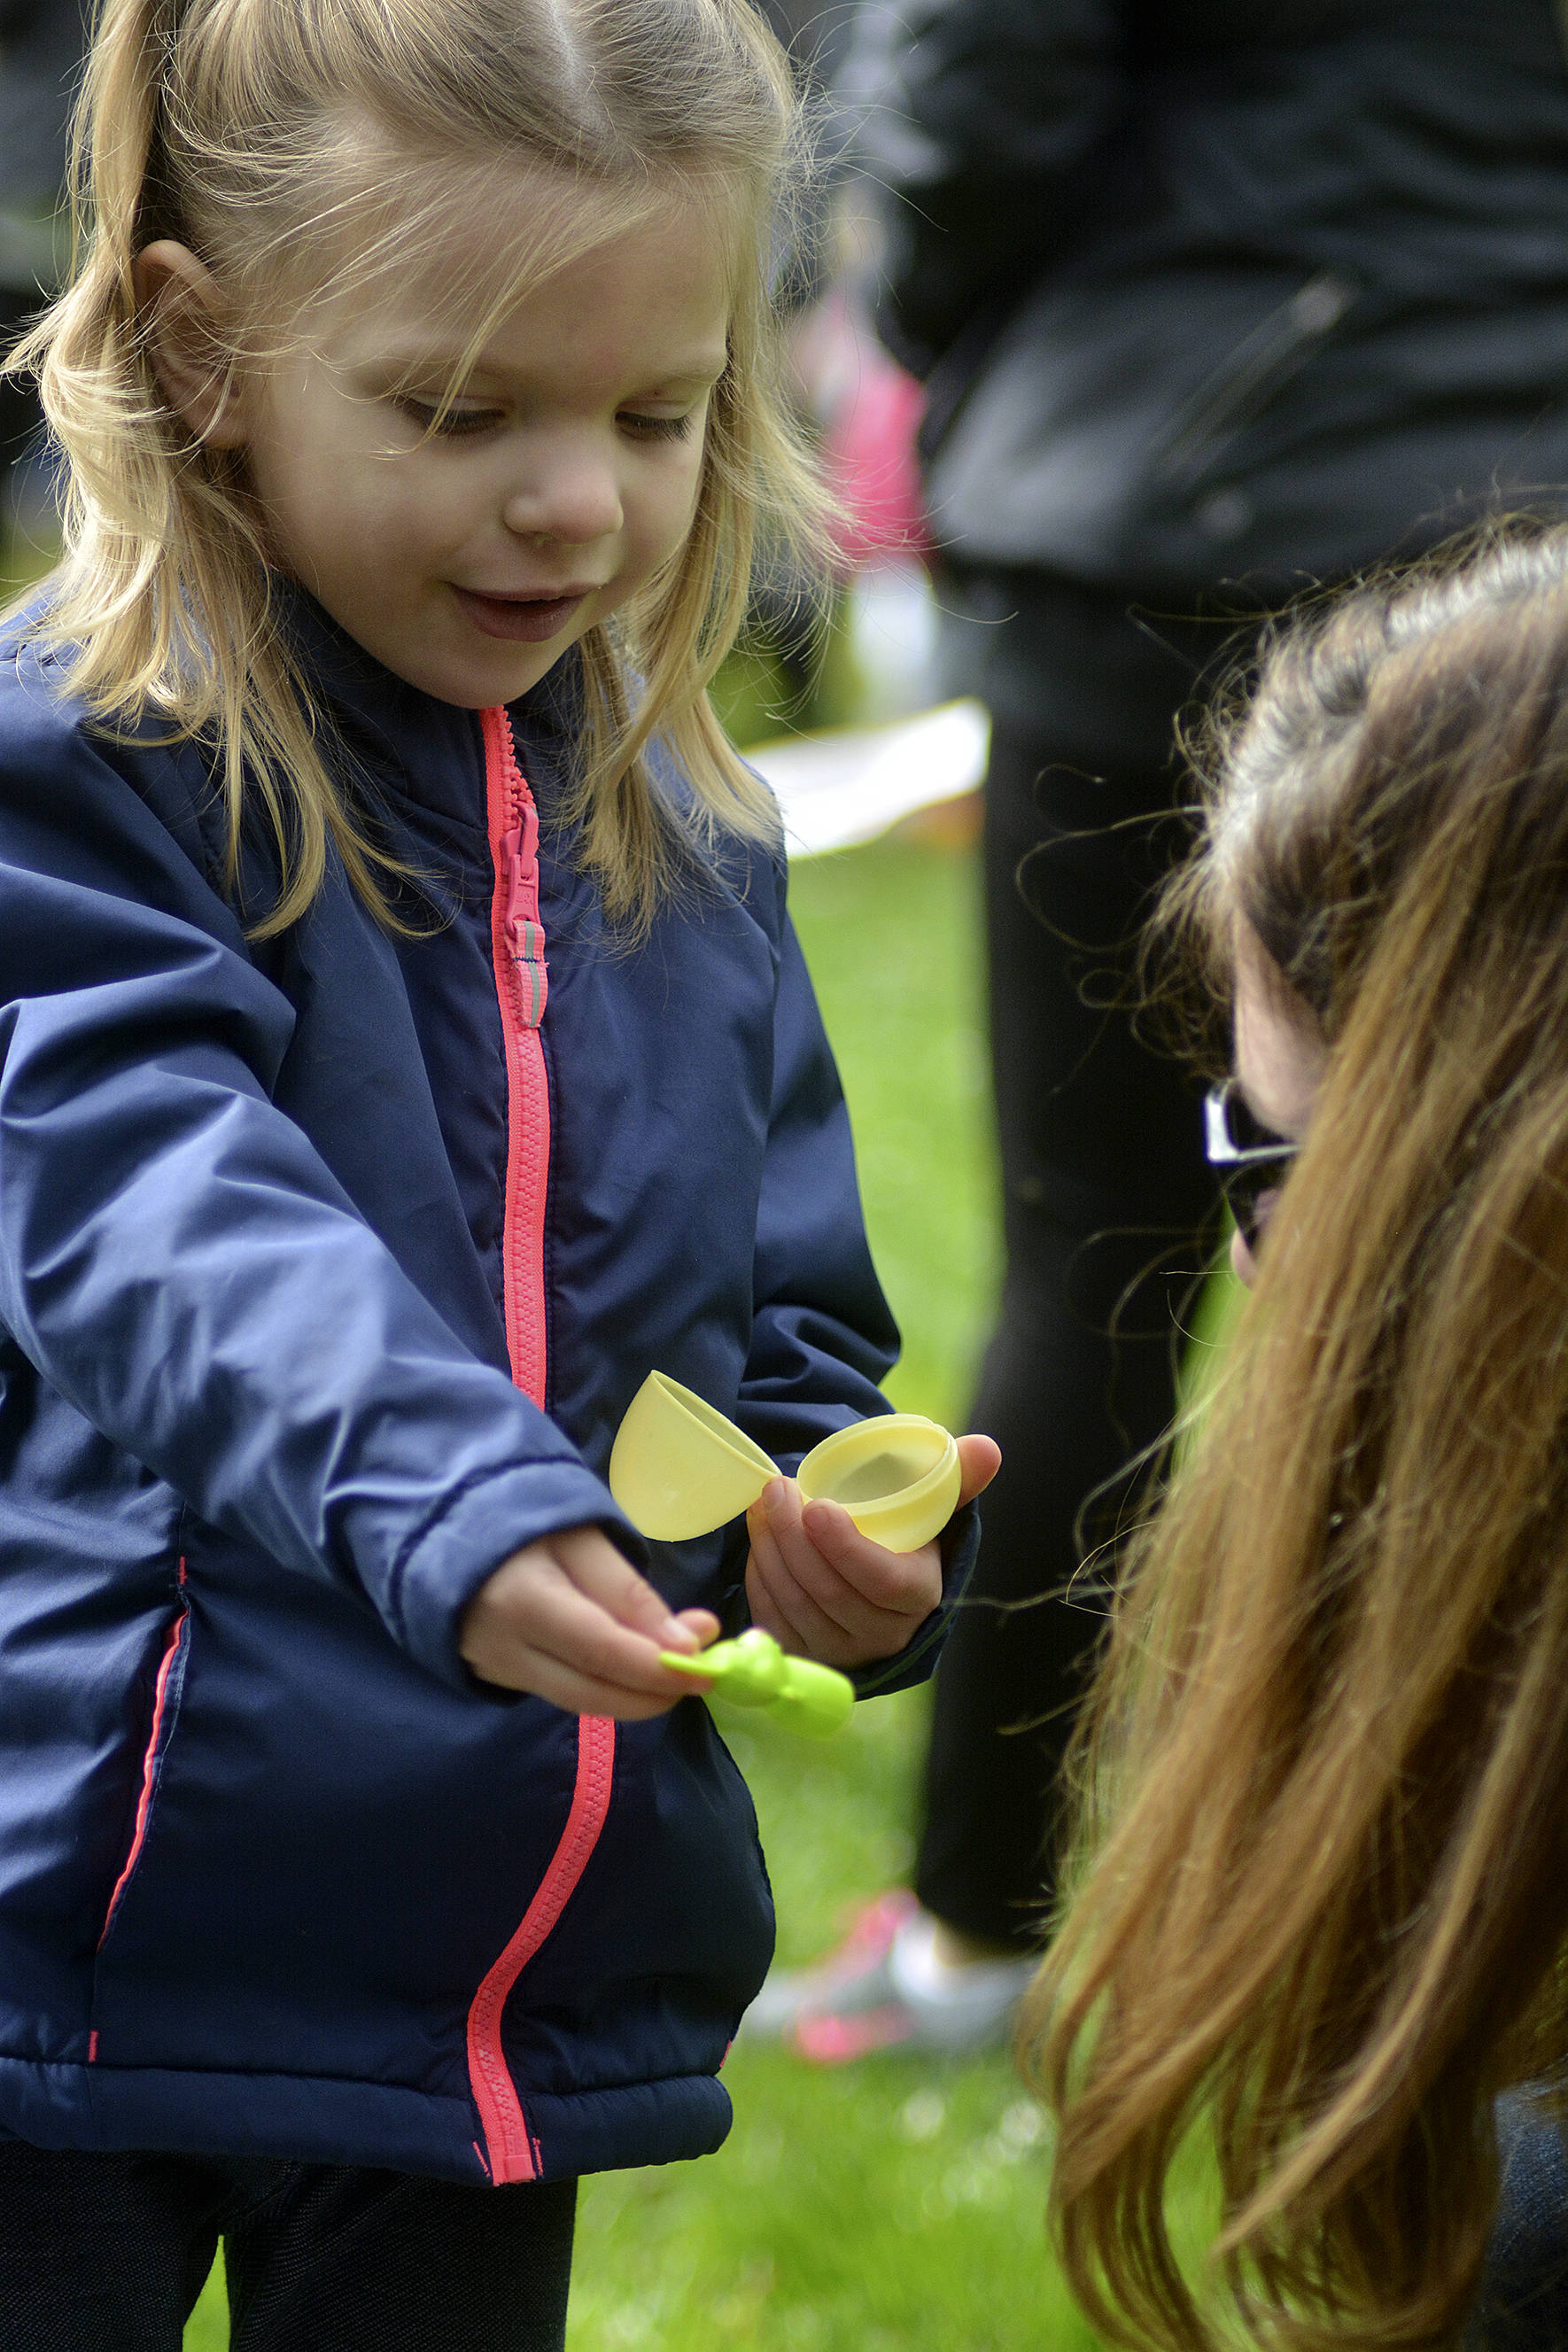 Alice Kurtz shows her family what she found in her Easter eggs at the Lake Wilderness Easter Egg hunt. Photo by Kayse Angel